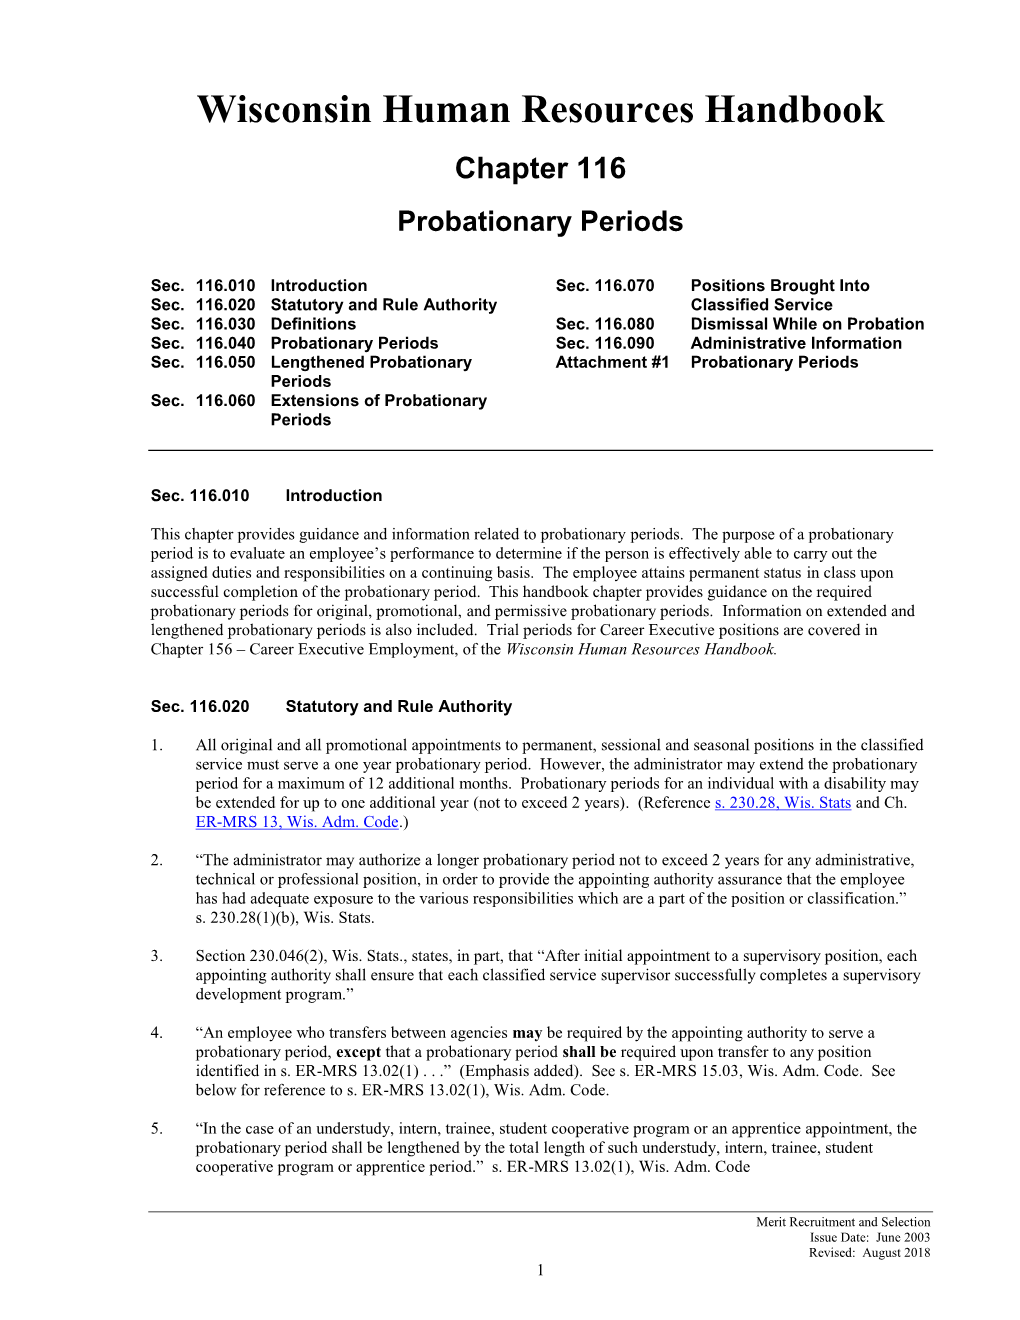 Chapter 116 Probationary Periods